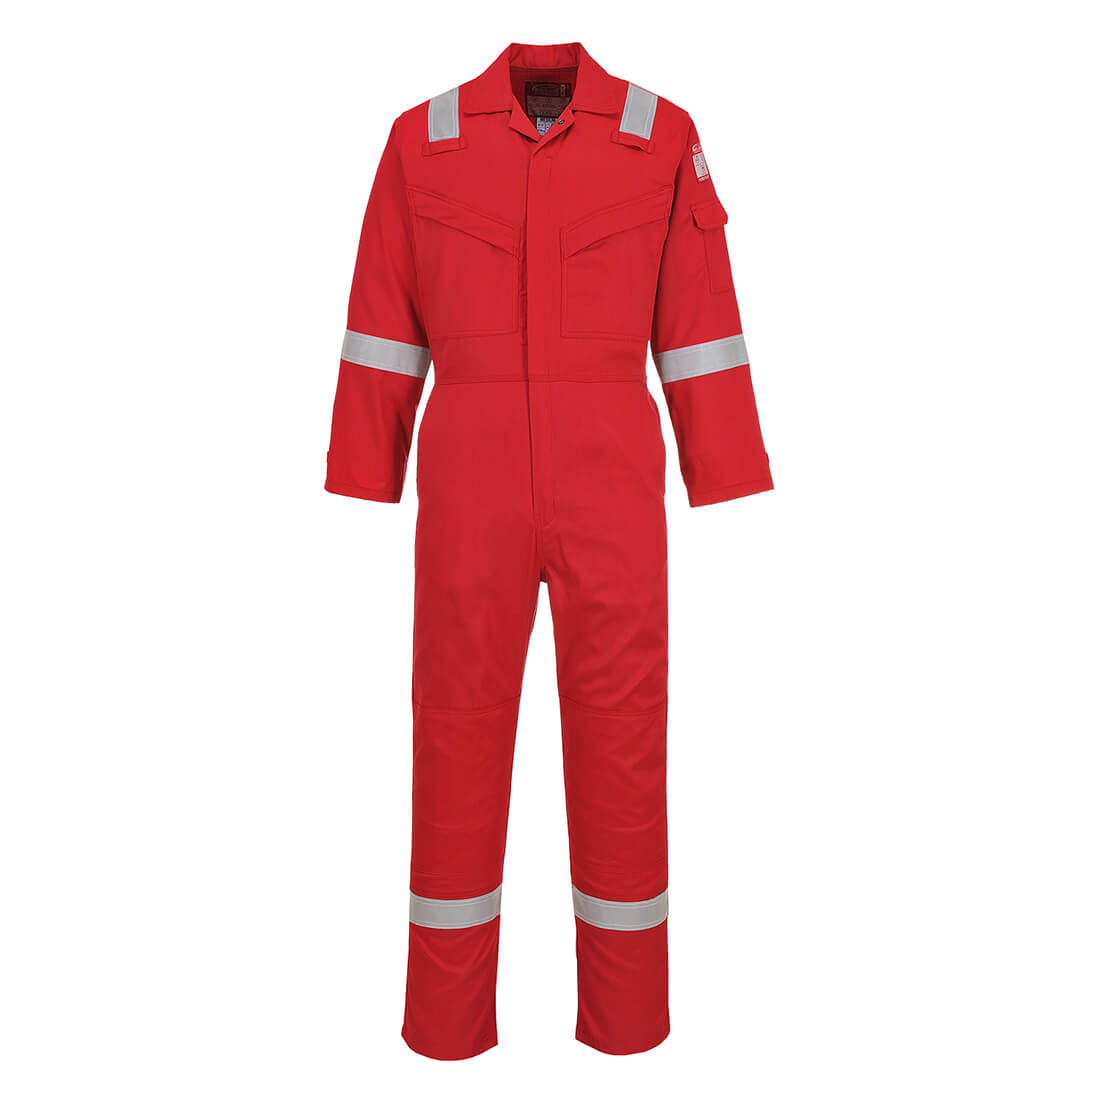 Image of Biz Flame Mens Flame Resistant Super Lightweight Antistatic Coverall Red 2XL 32"